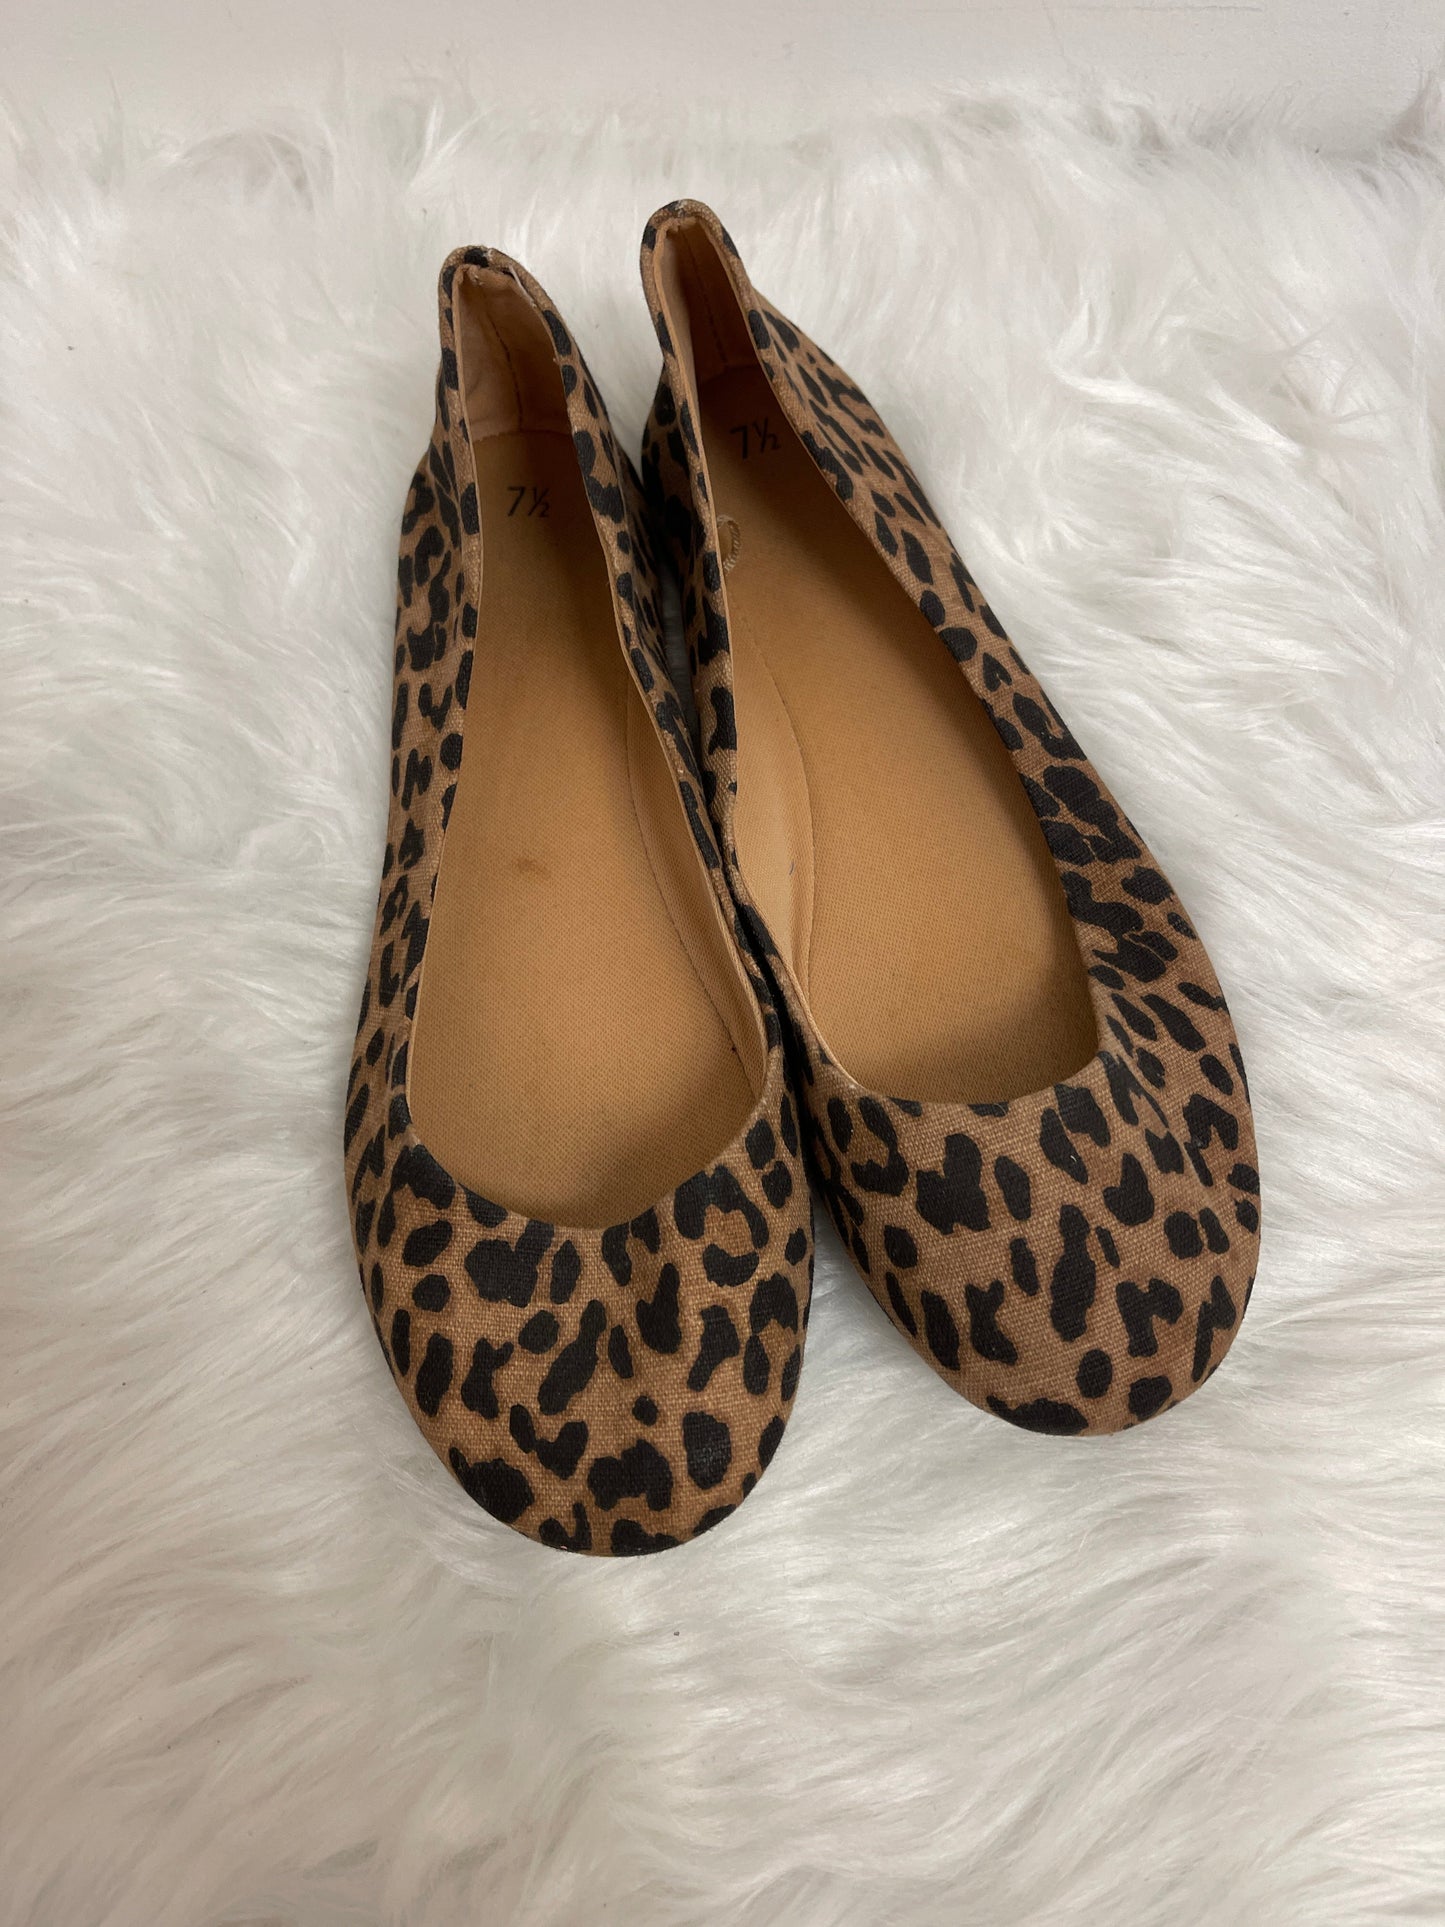 Animal Print Shoes Flats Time And Tru, Size 10